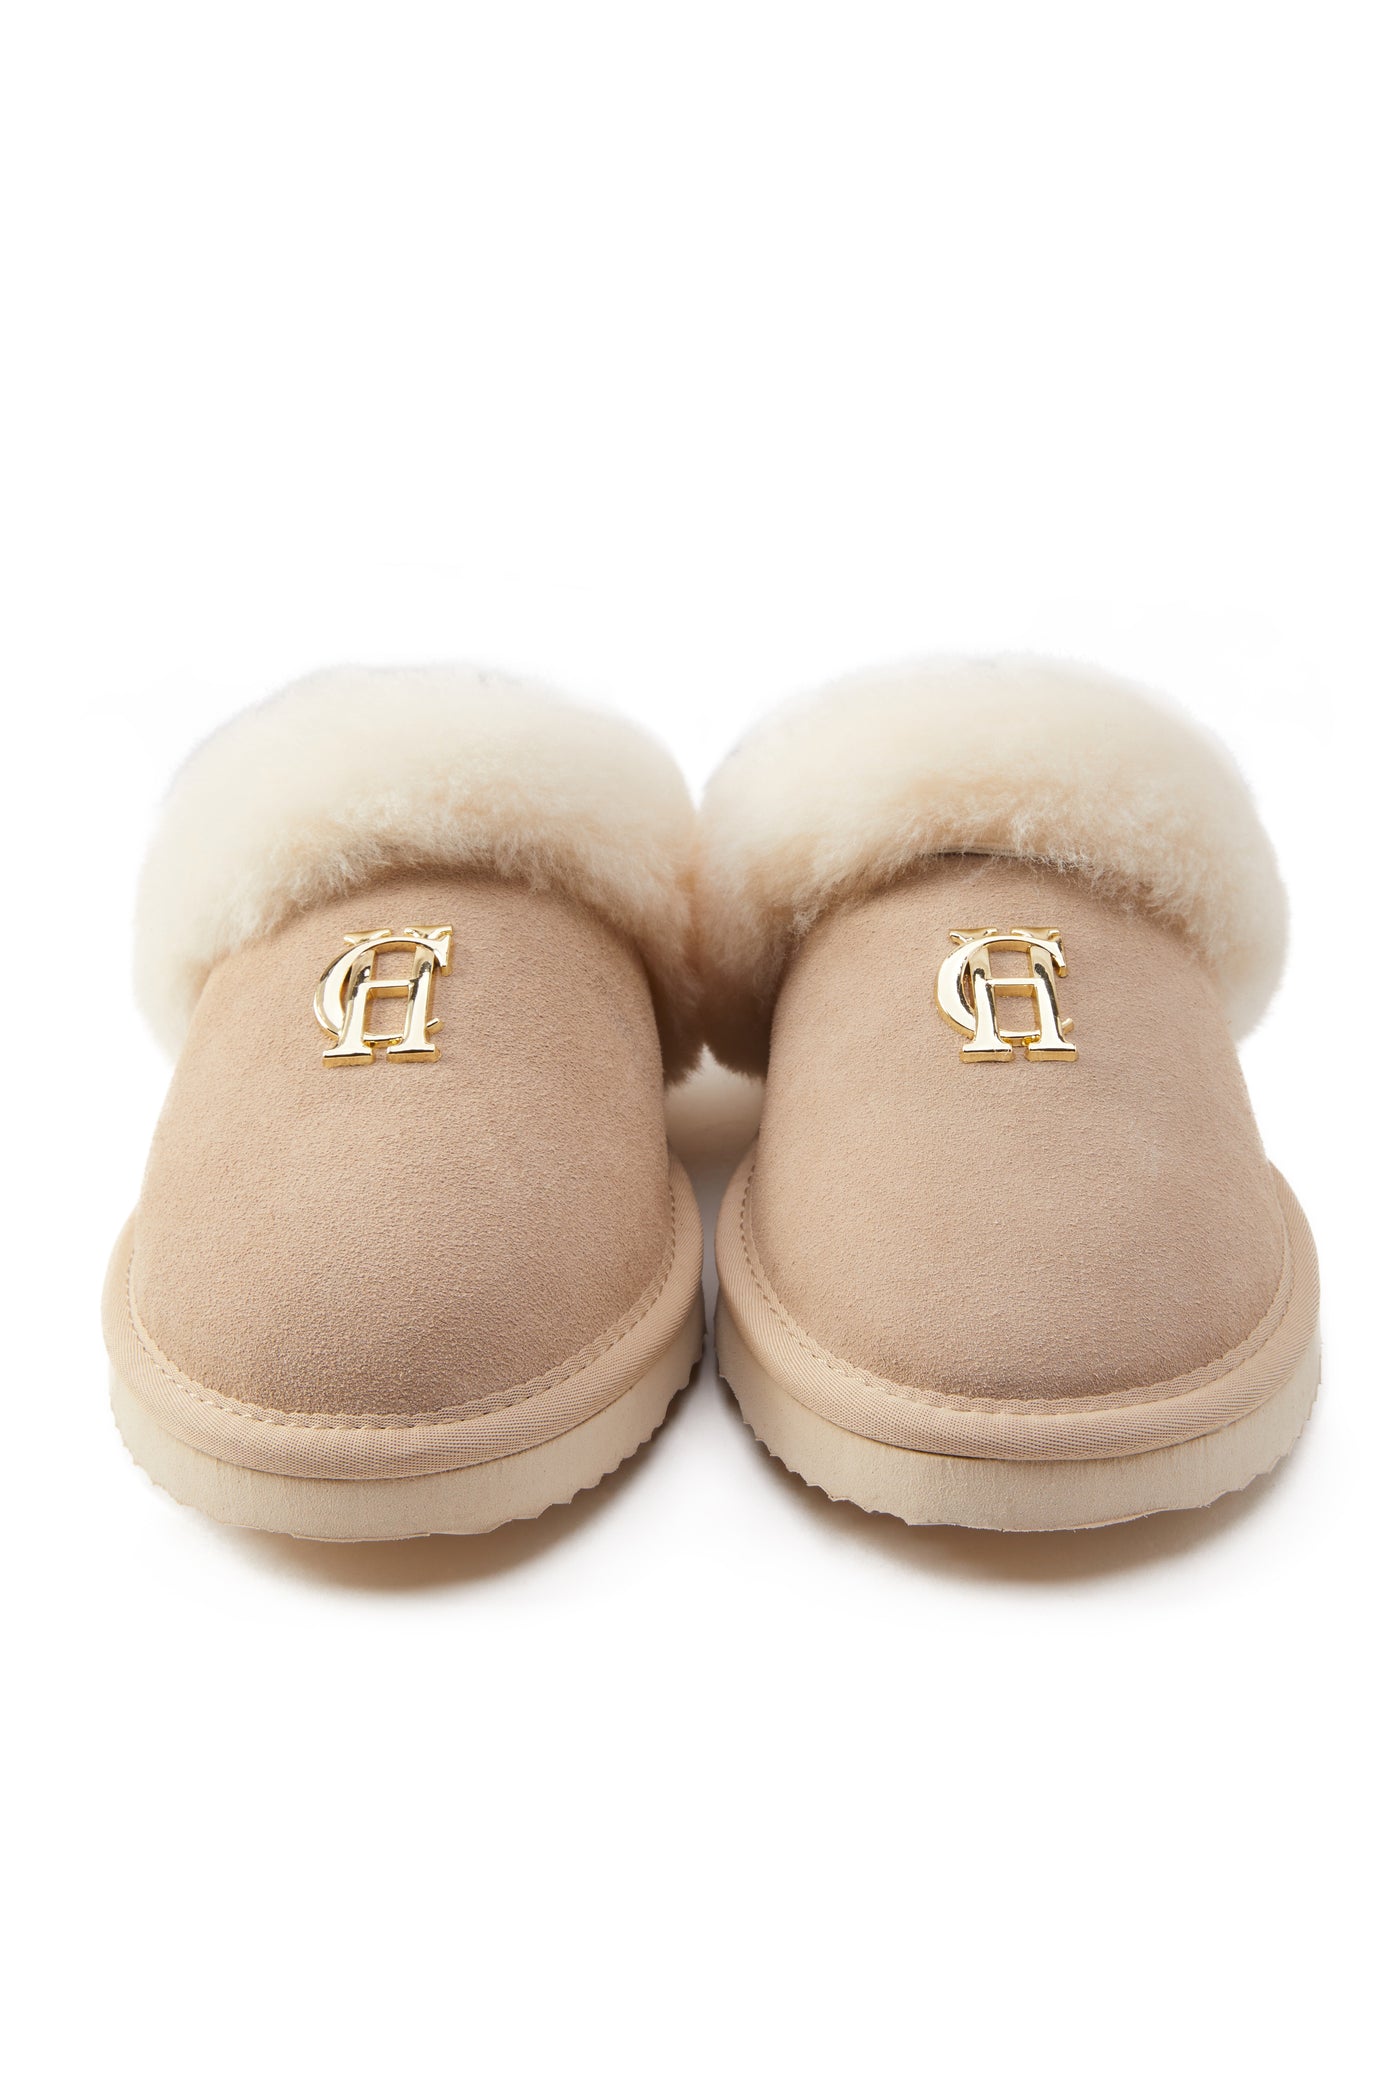 Holland Cooper Shearling Slipper in Oyster Front